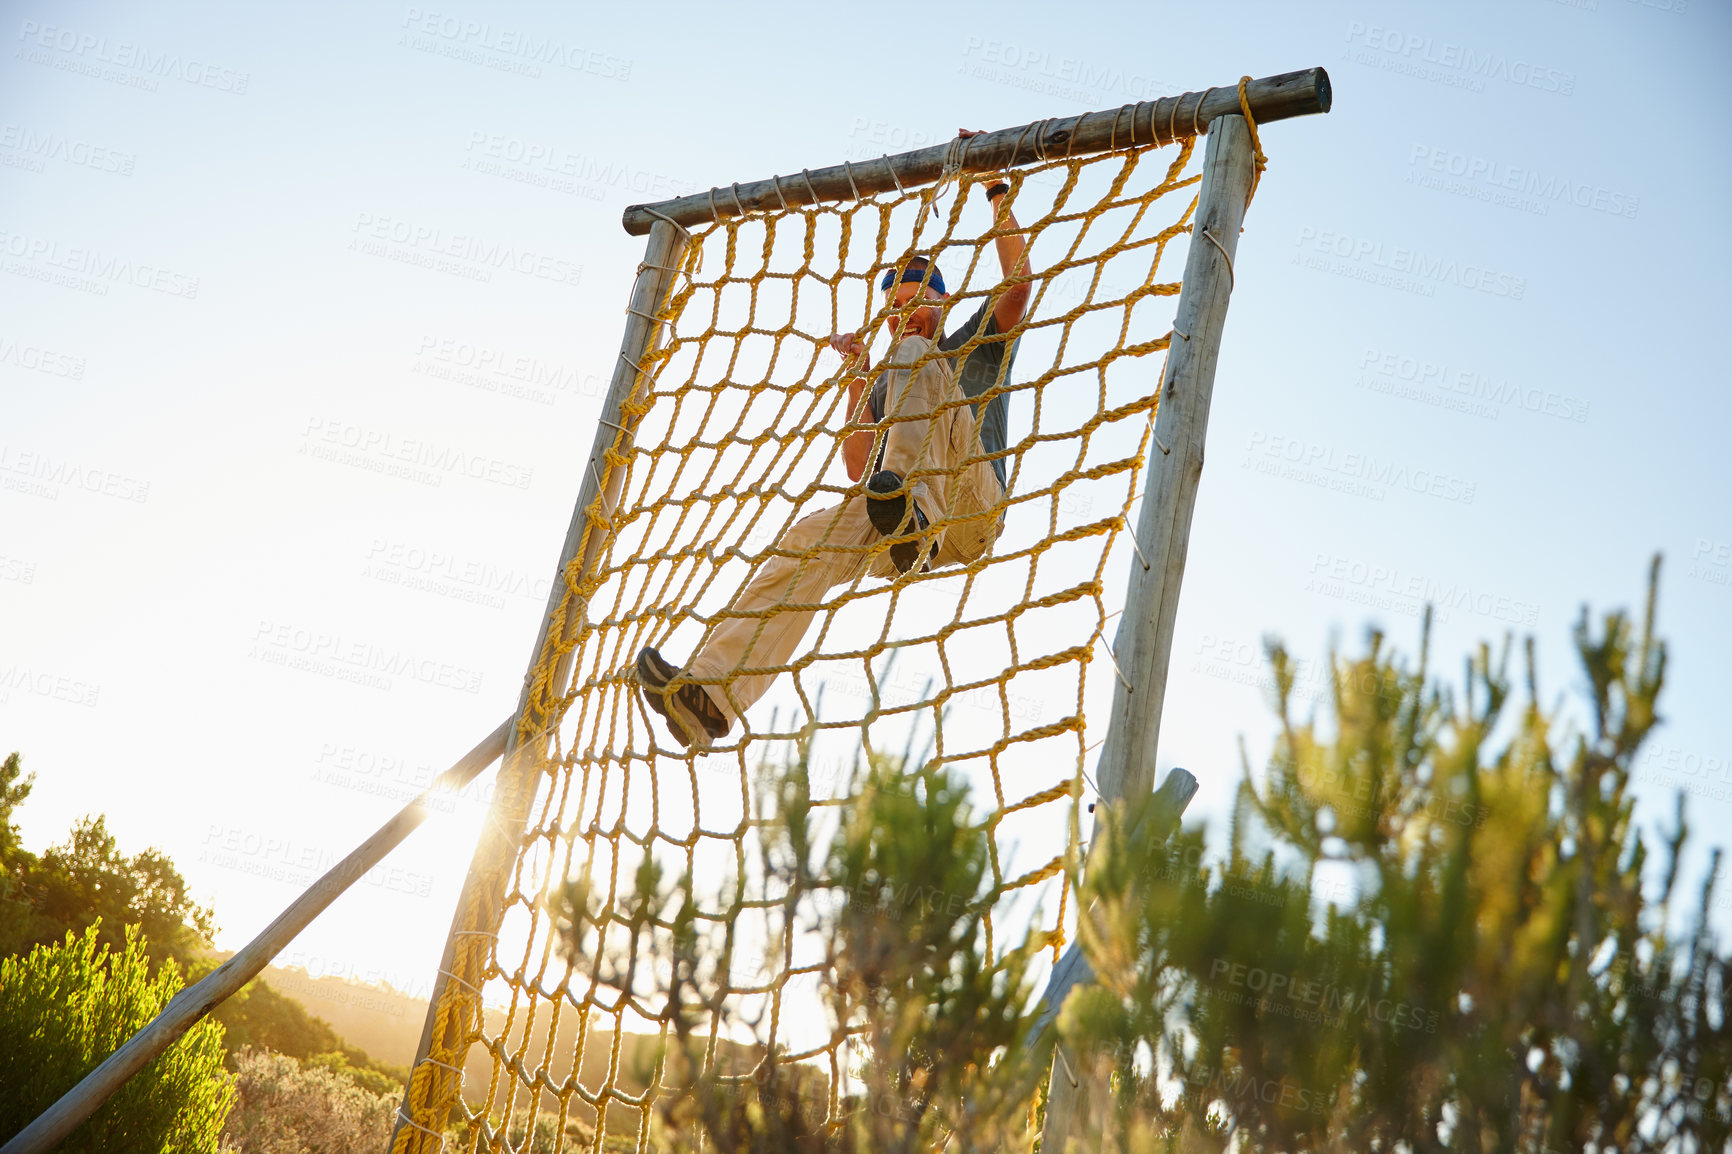 Buy stock photo Shot of a man climbing over an obstacle at bootcamp